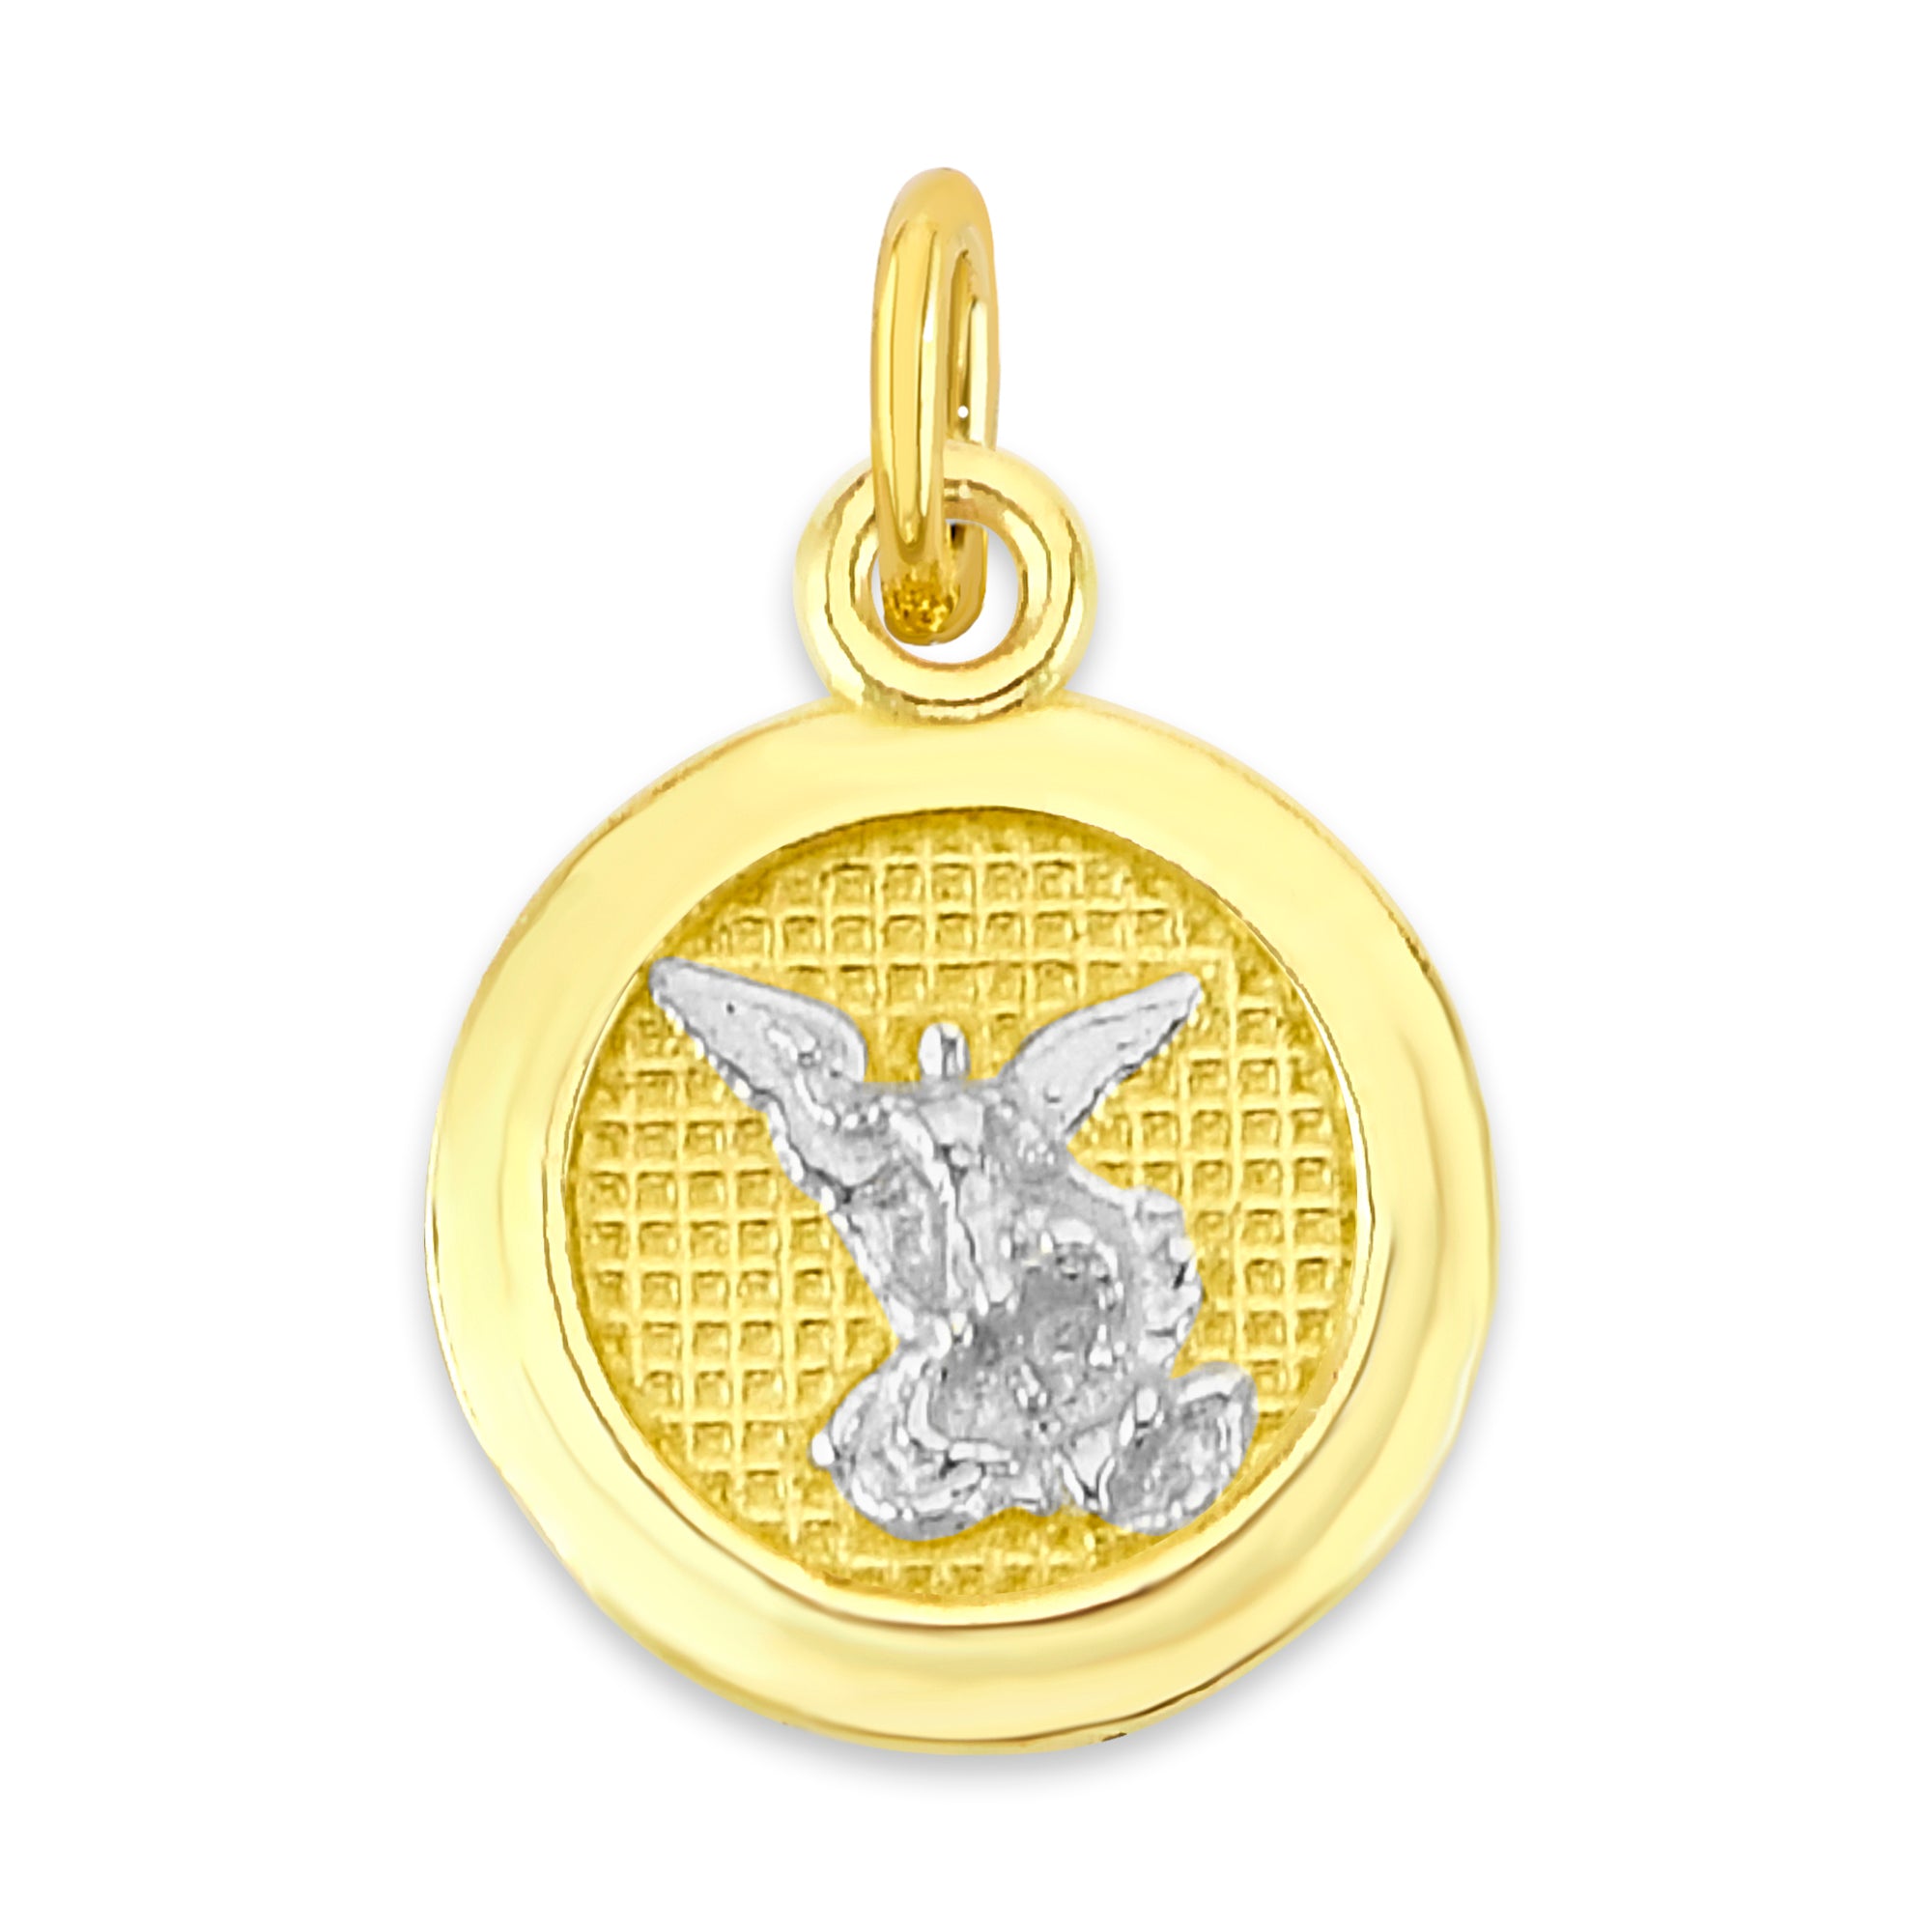 Solid Two-Tone Gold Saint Michael Charm - 10k or 14k